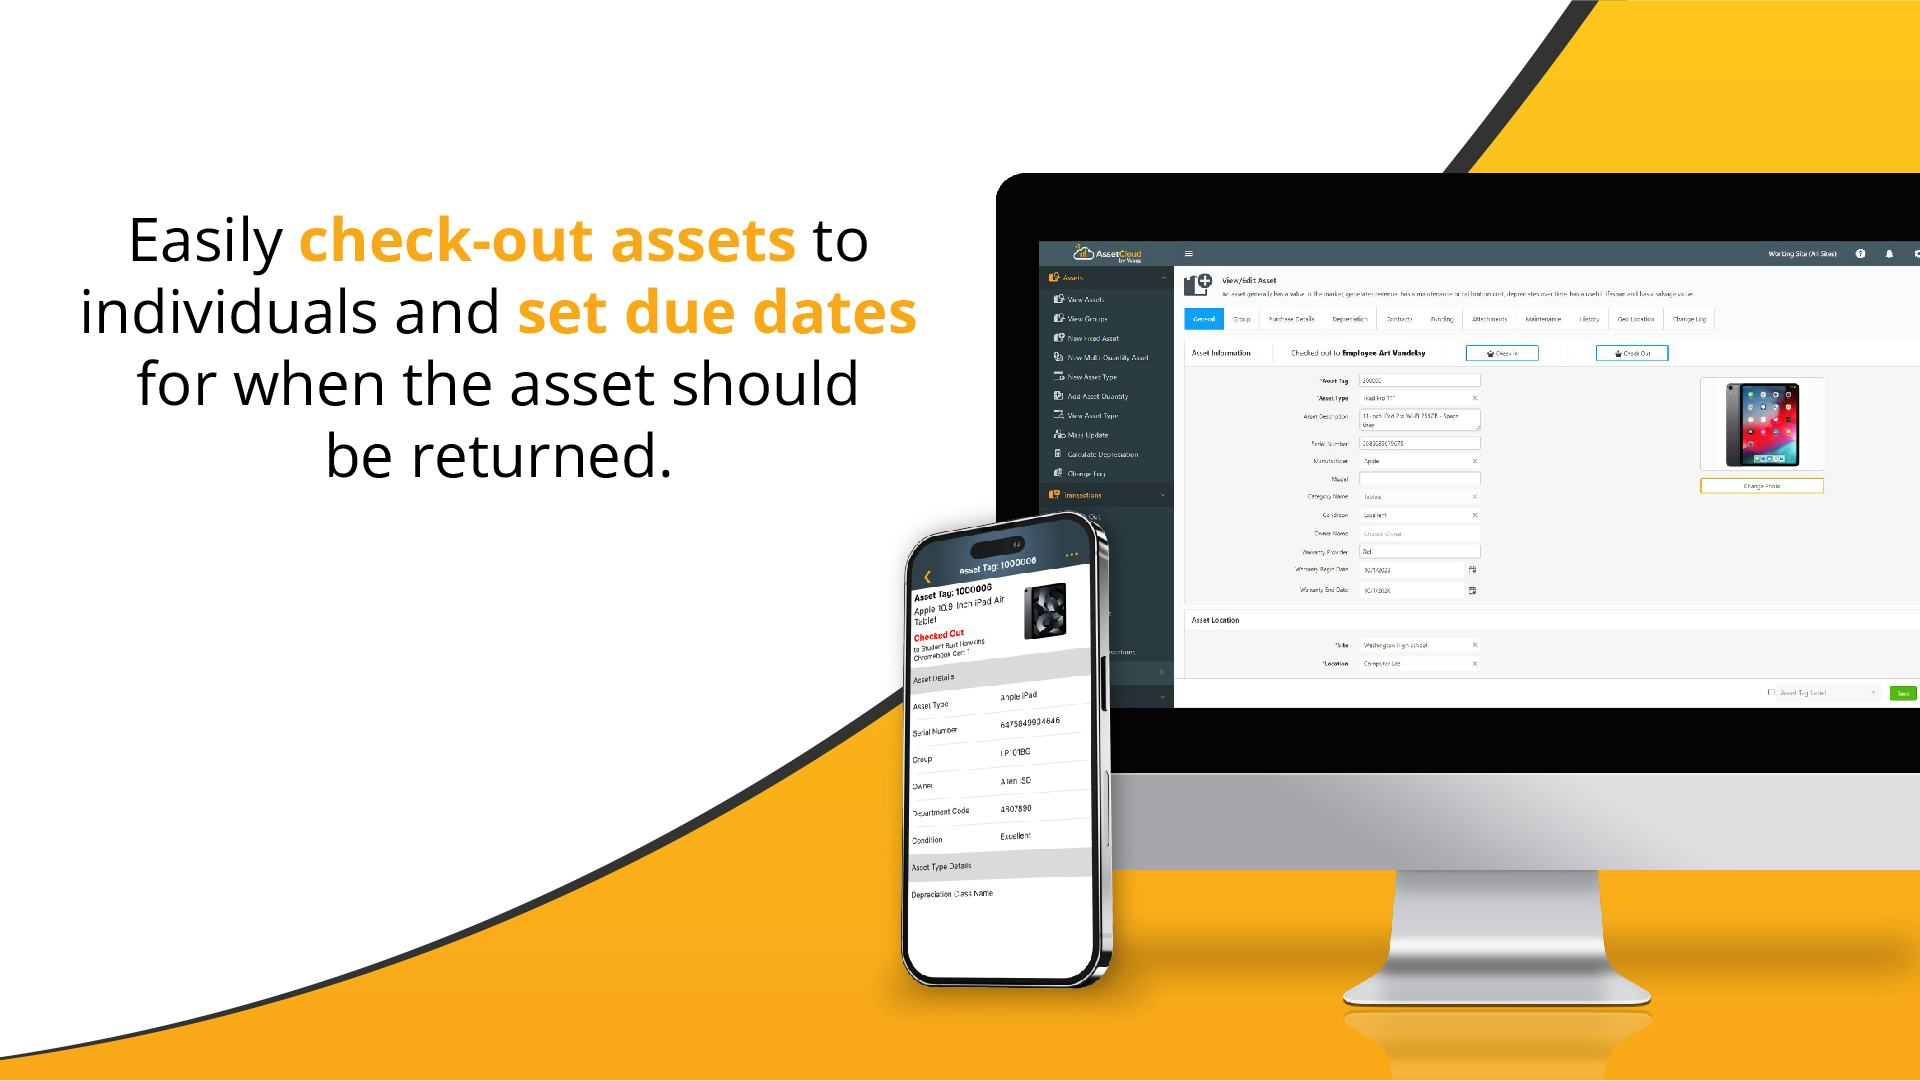 AssetCloud Software - Easily check-out assets to individuals and set due dates for when the assets should be returned